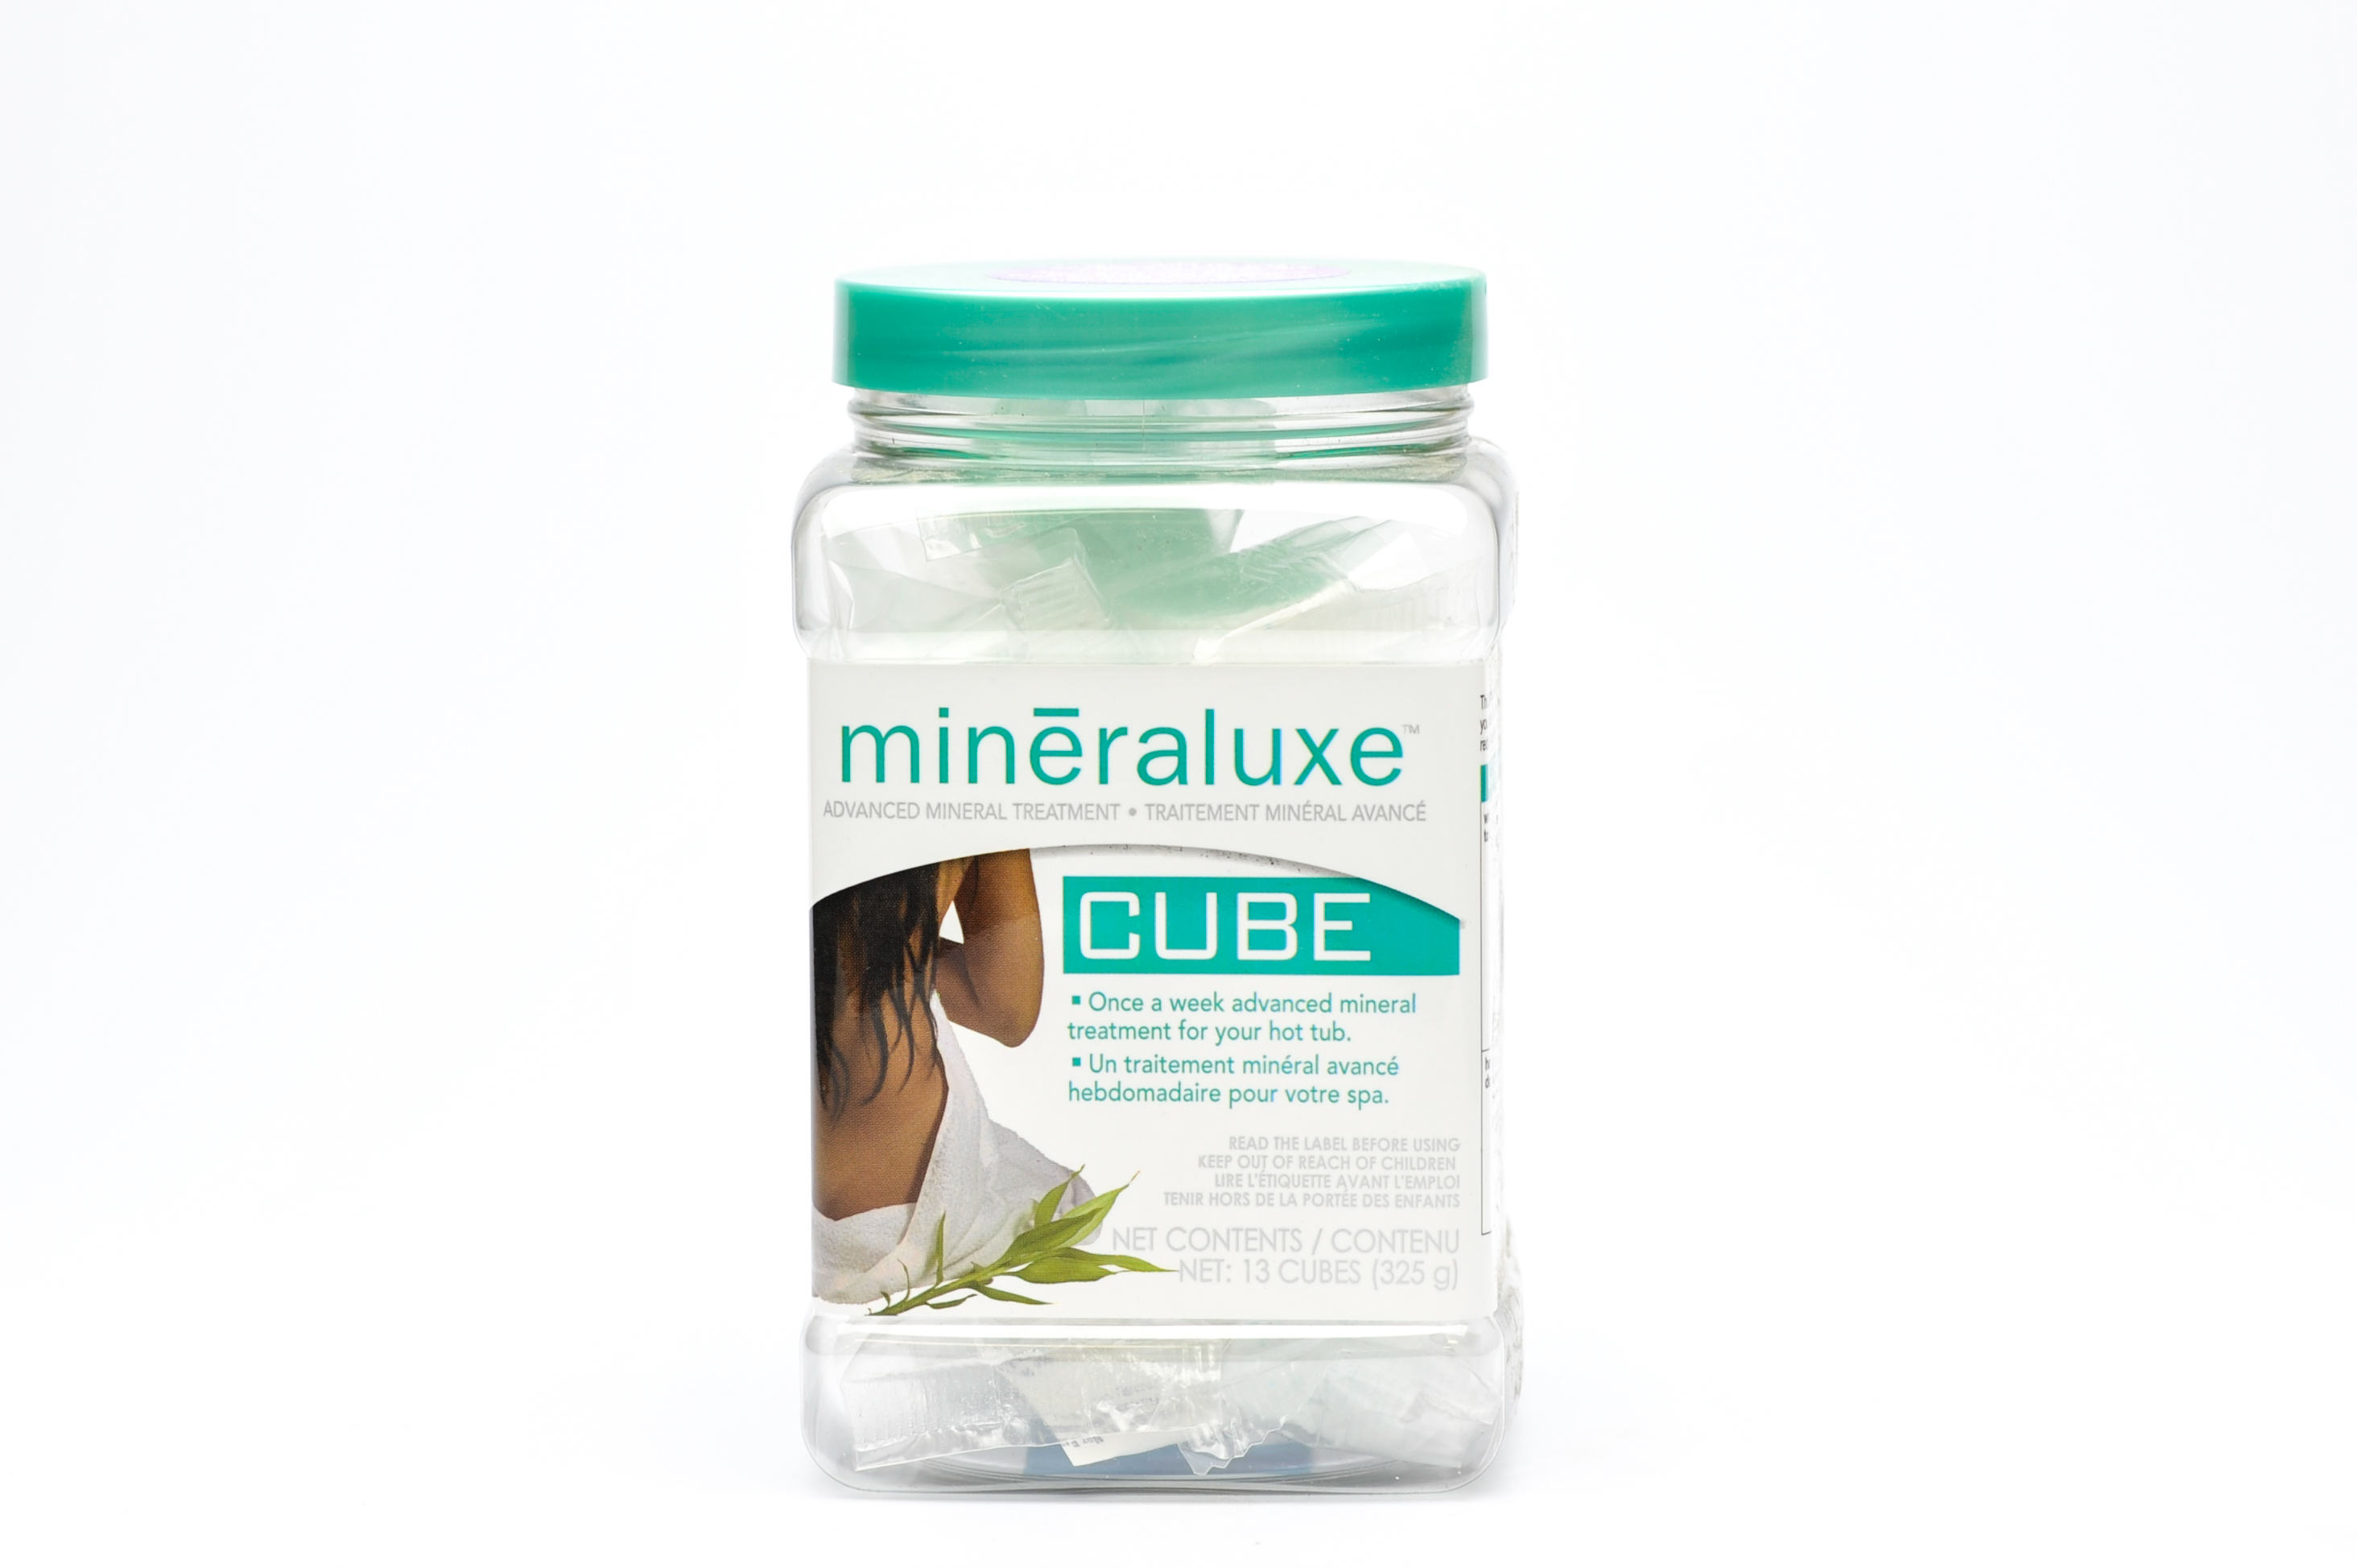 Mineraluxe Cubes 8 Per Case - UNDEFINED